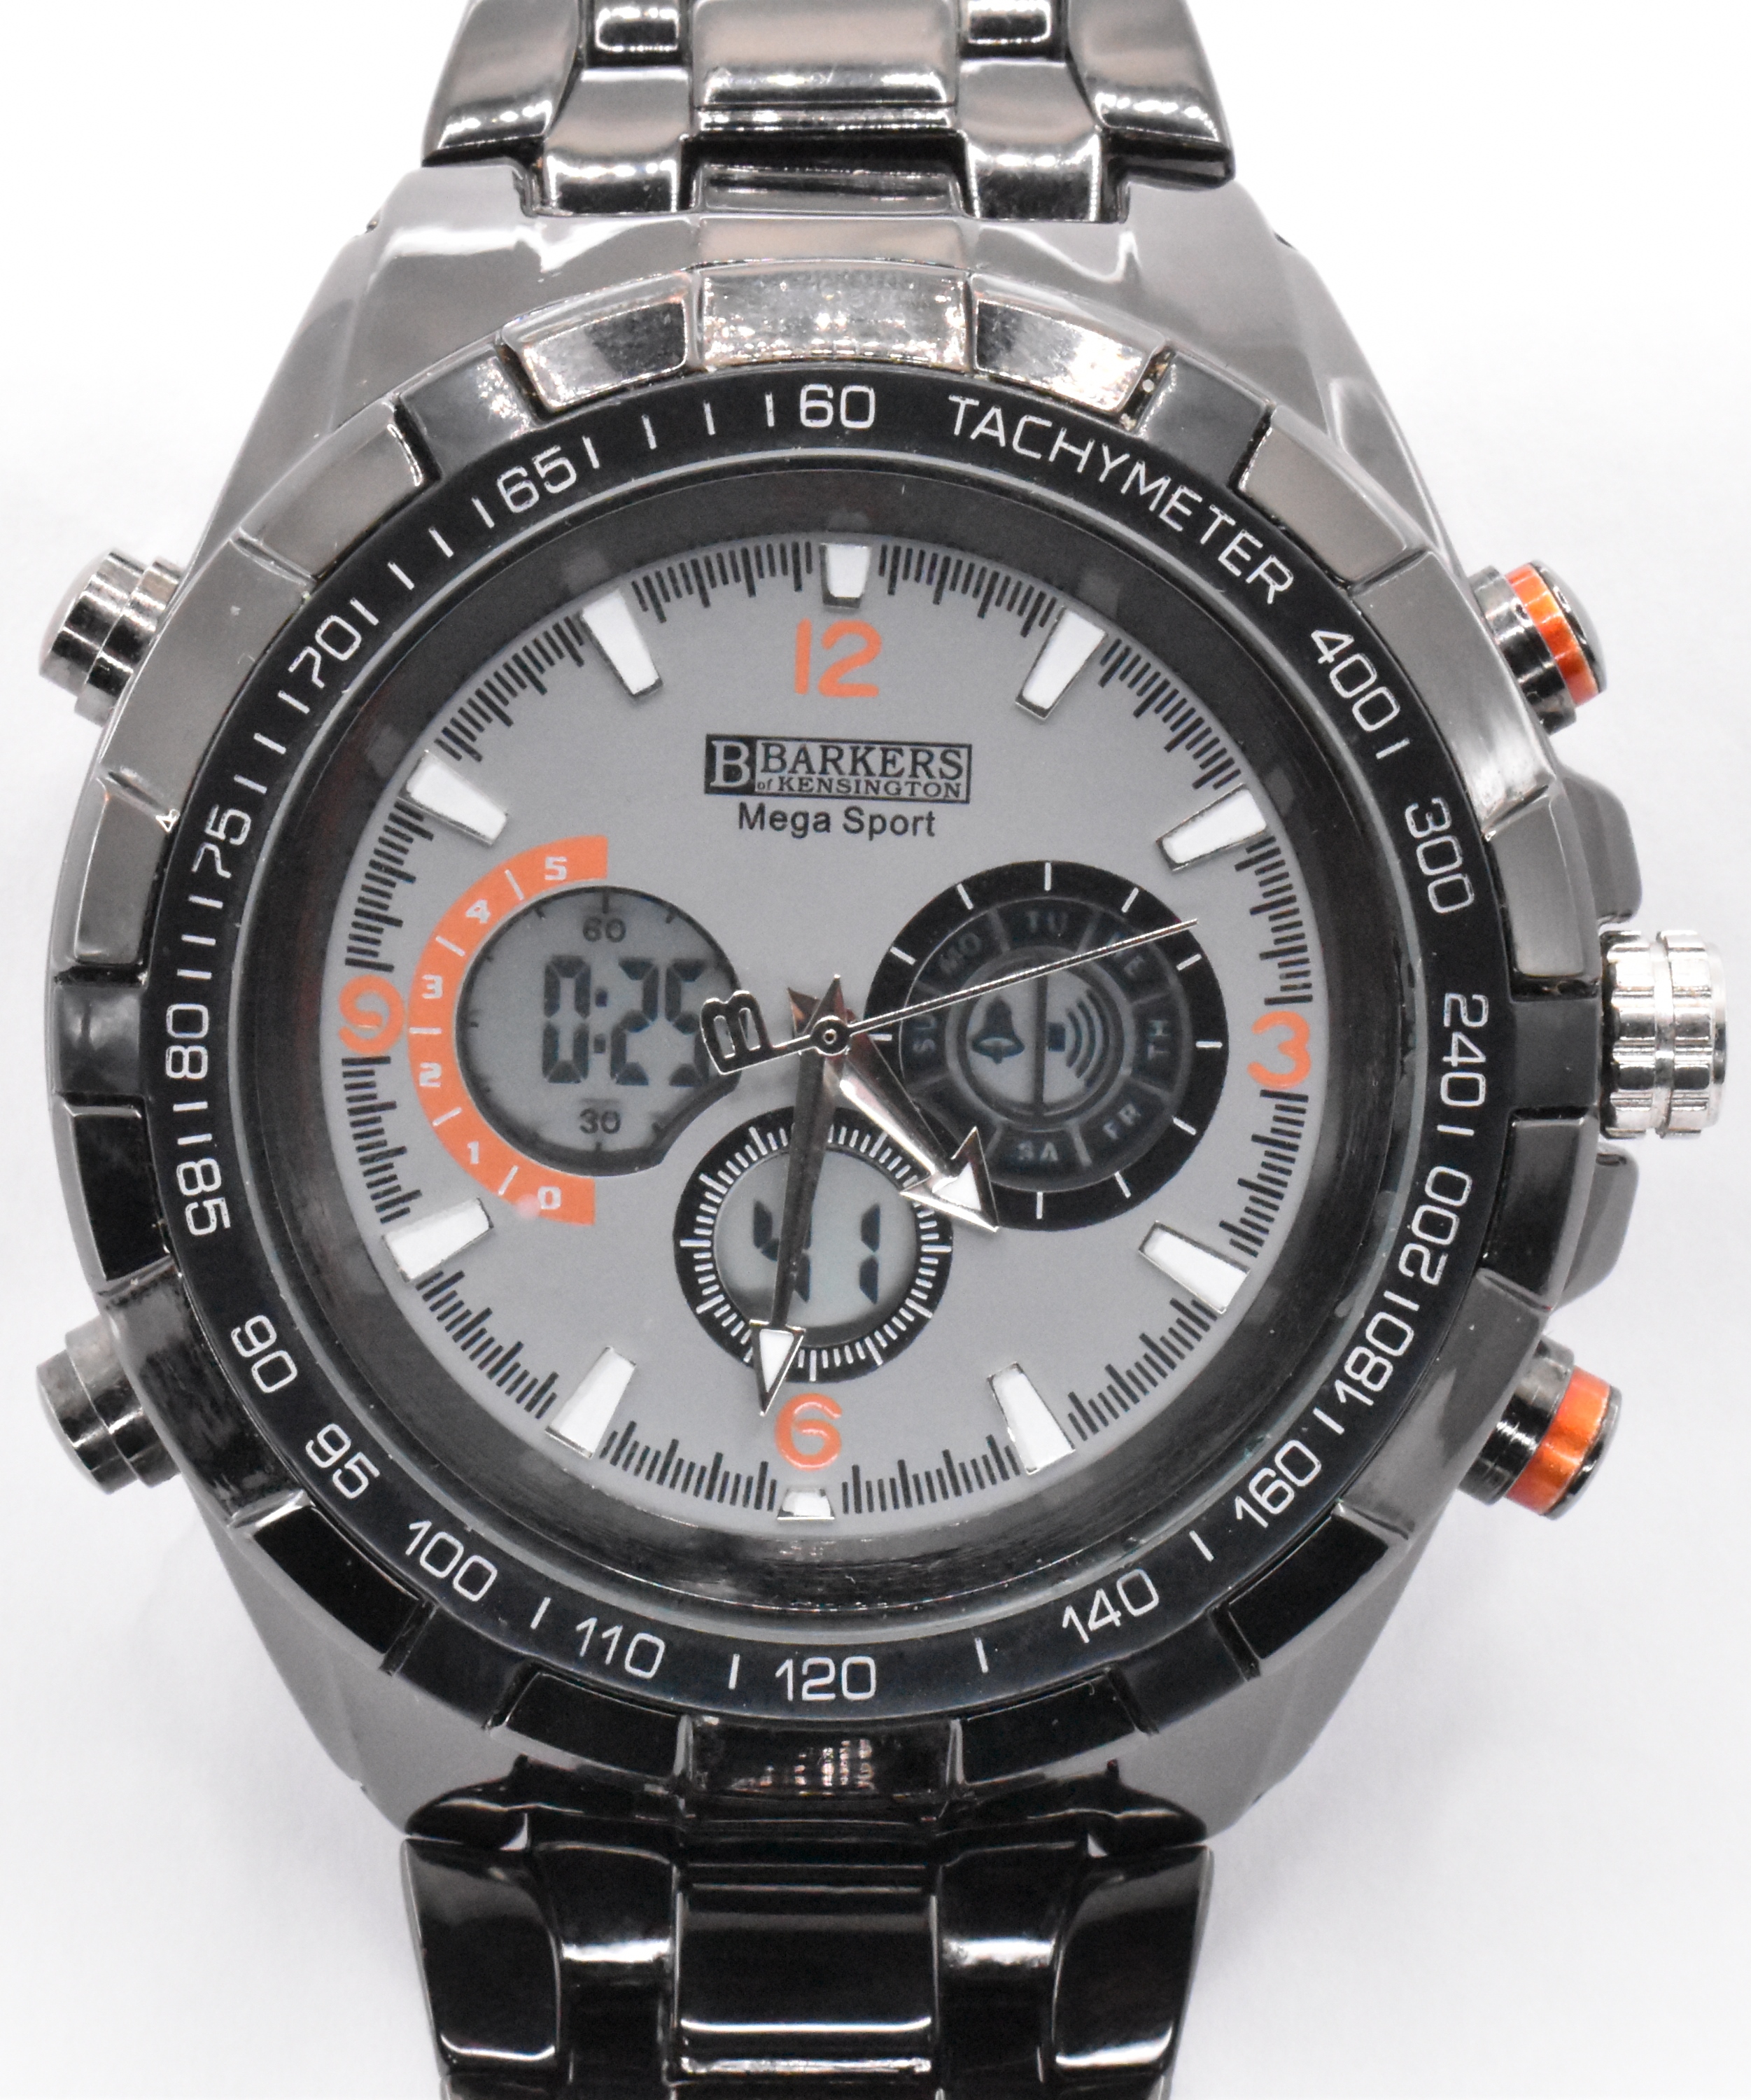 BARKERS OF KENSINGTON MEGA SPORT LIMITED EDITION WATCH - Image 2 of 4